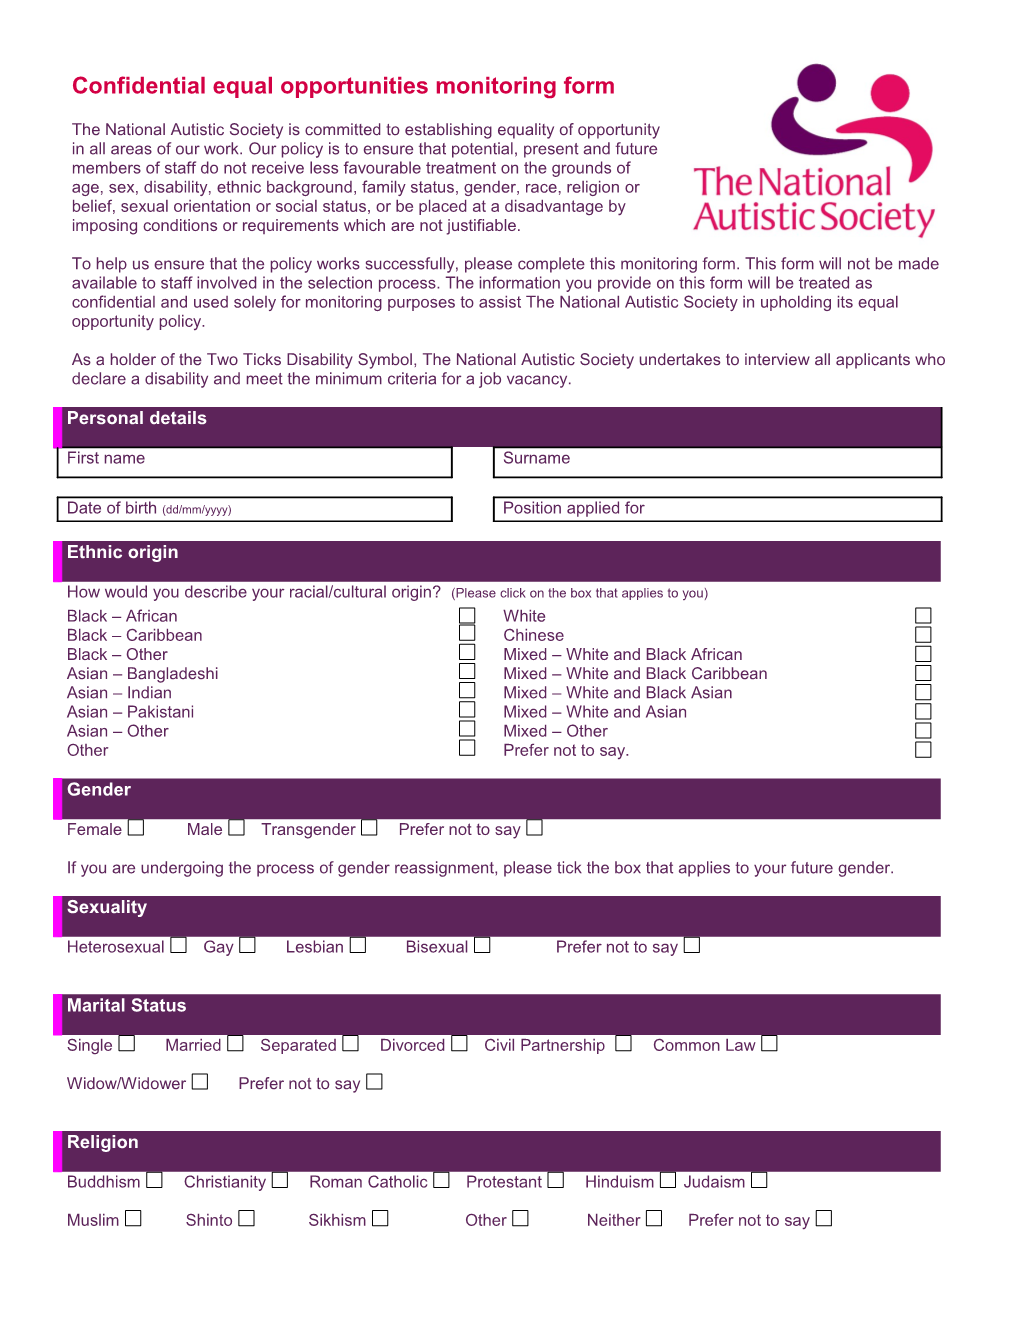 Confidential Equal Opportunities Monitoring Form